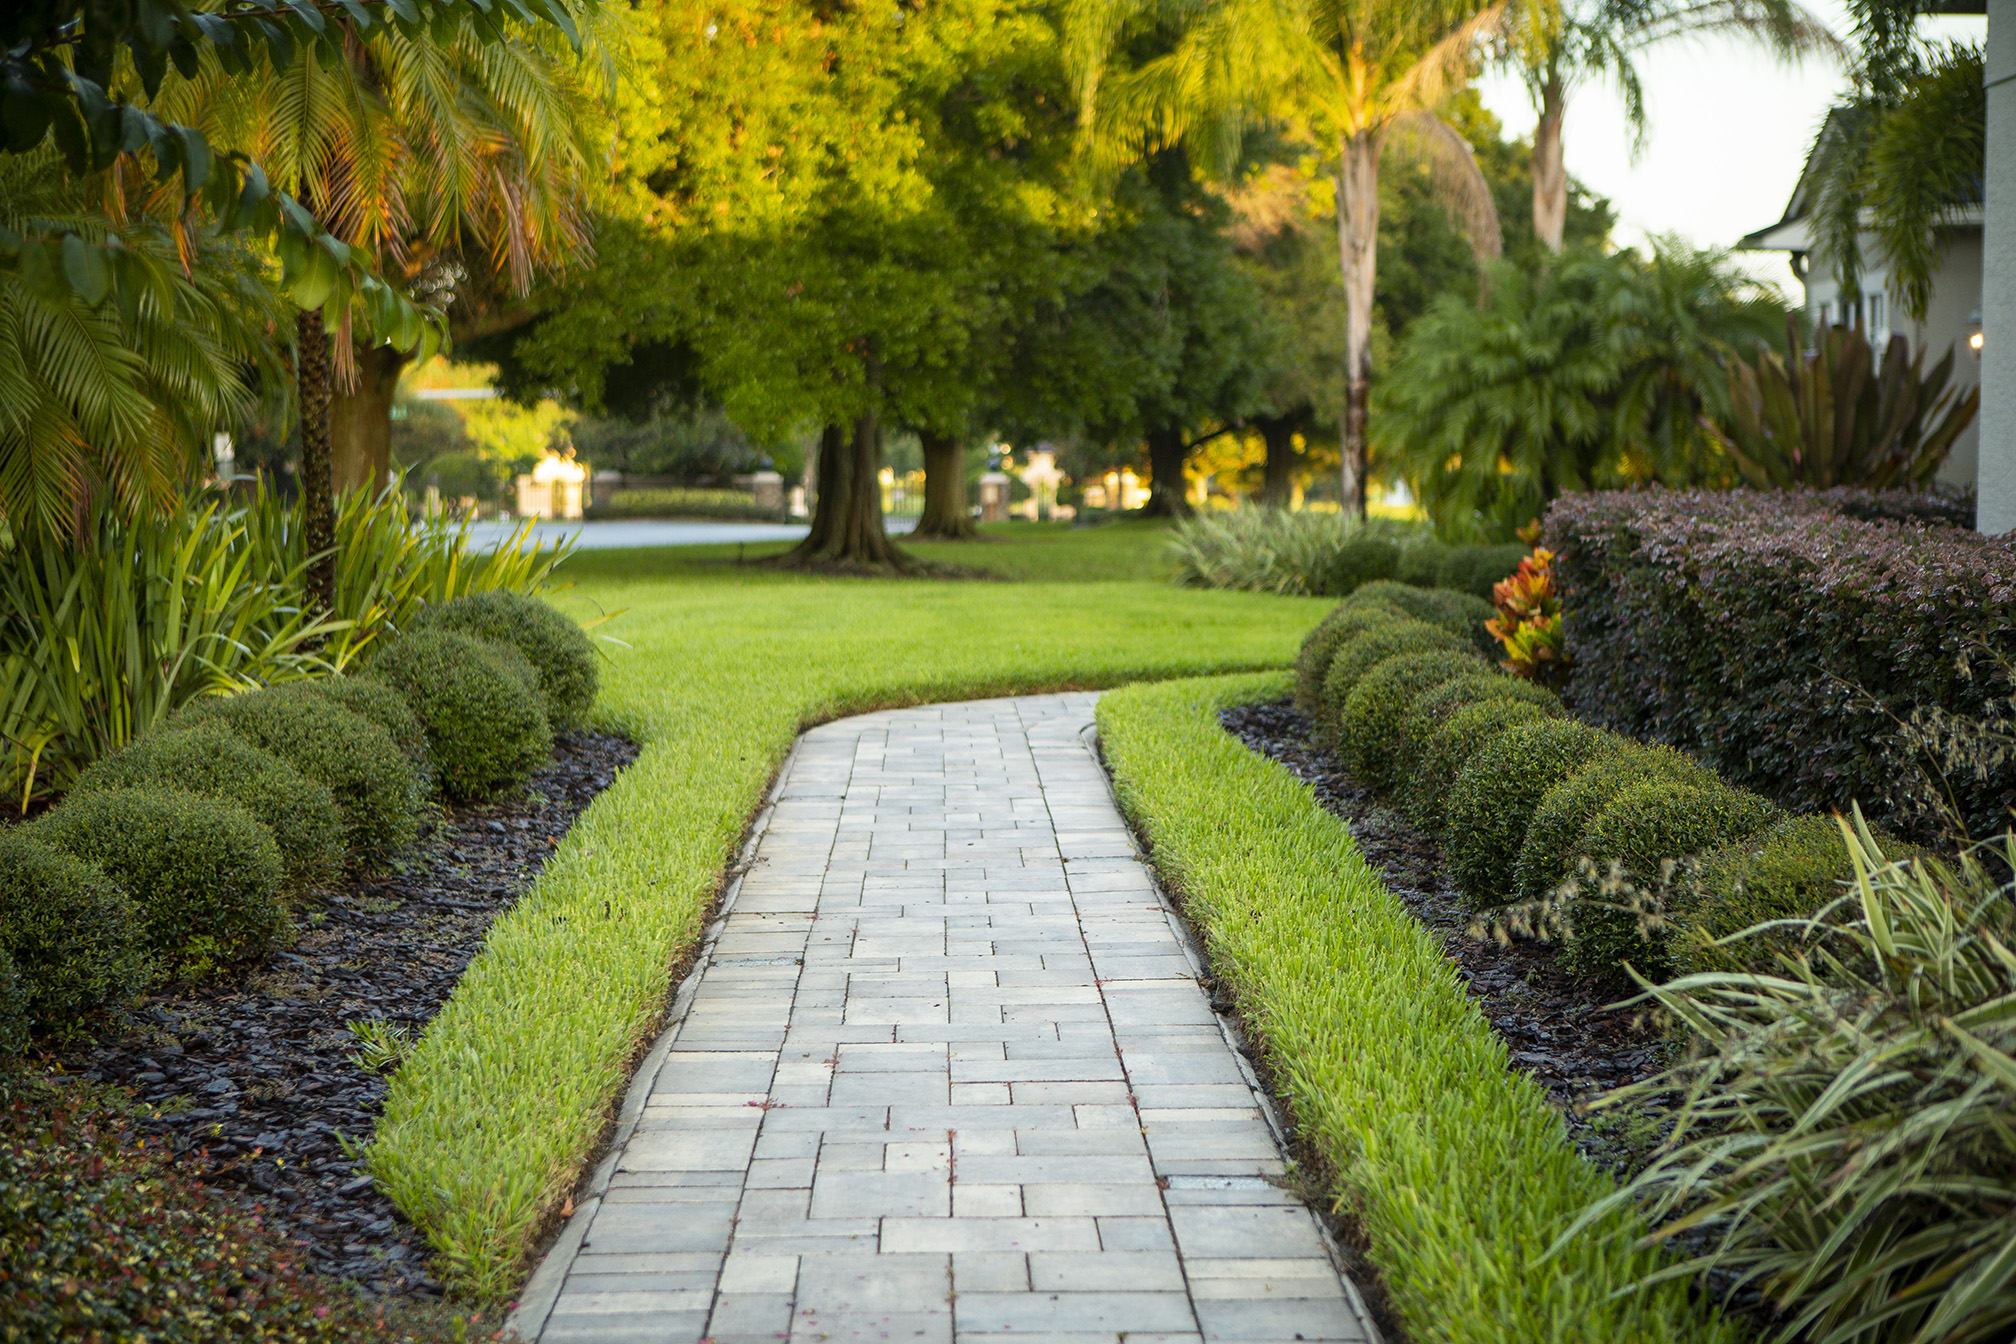 Paver walkway surrounded by plants and shrubs